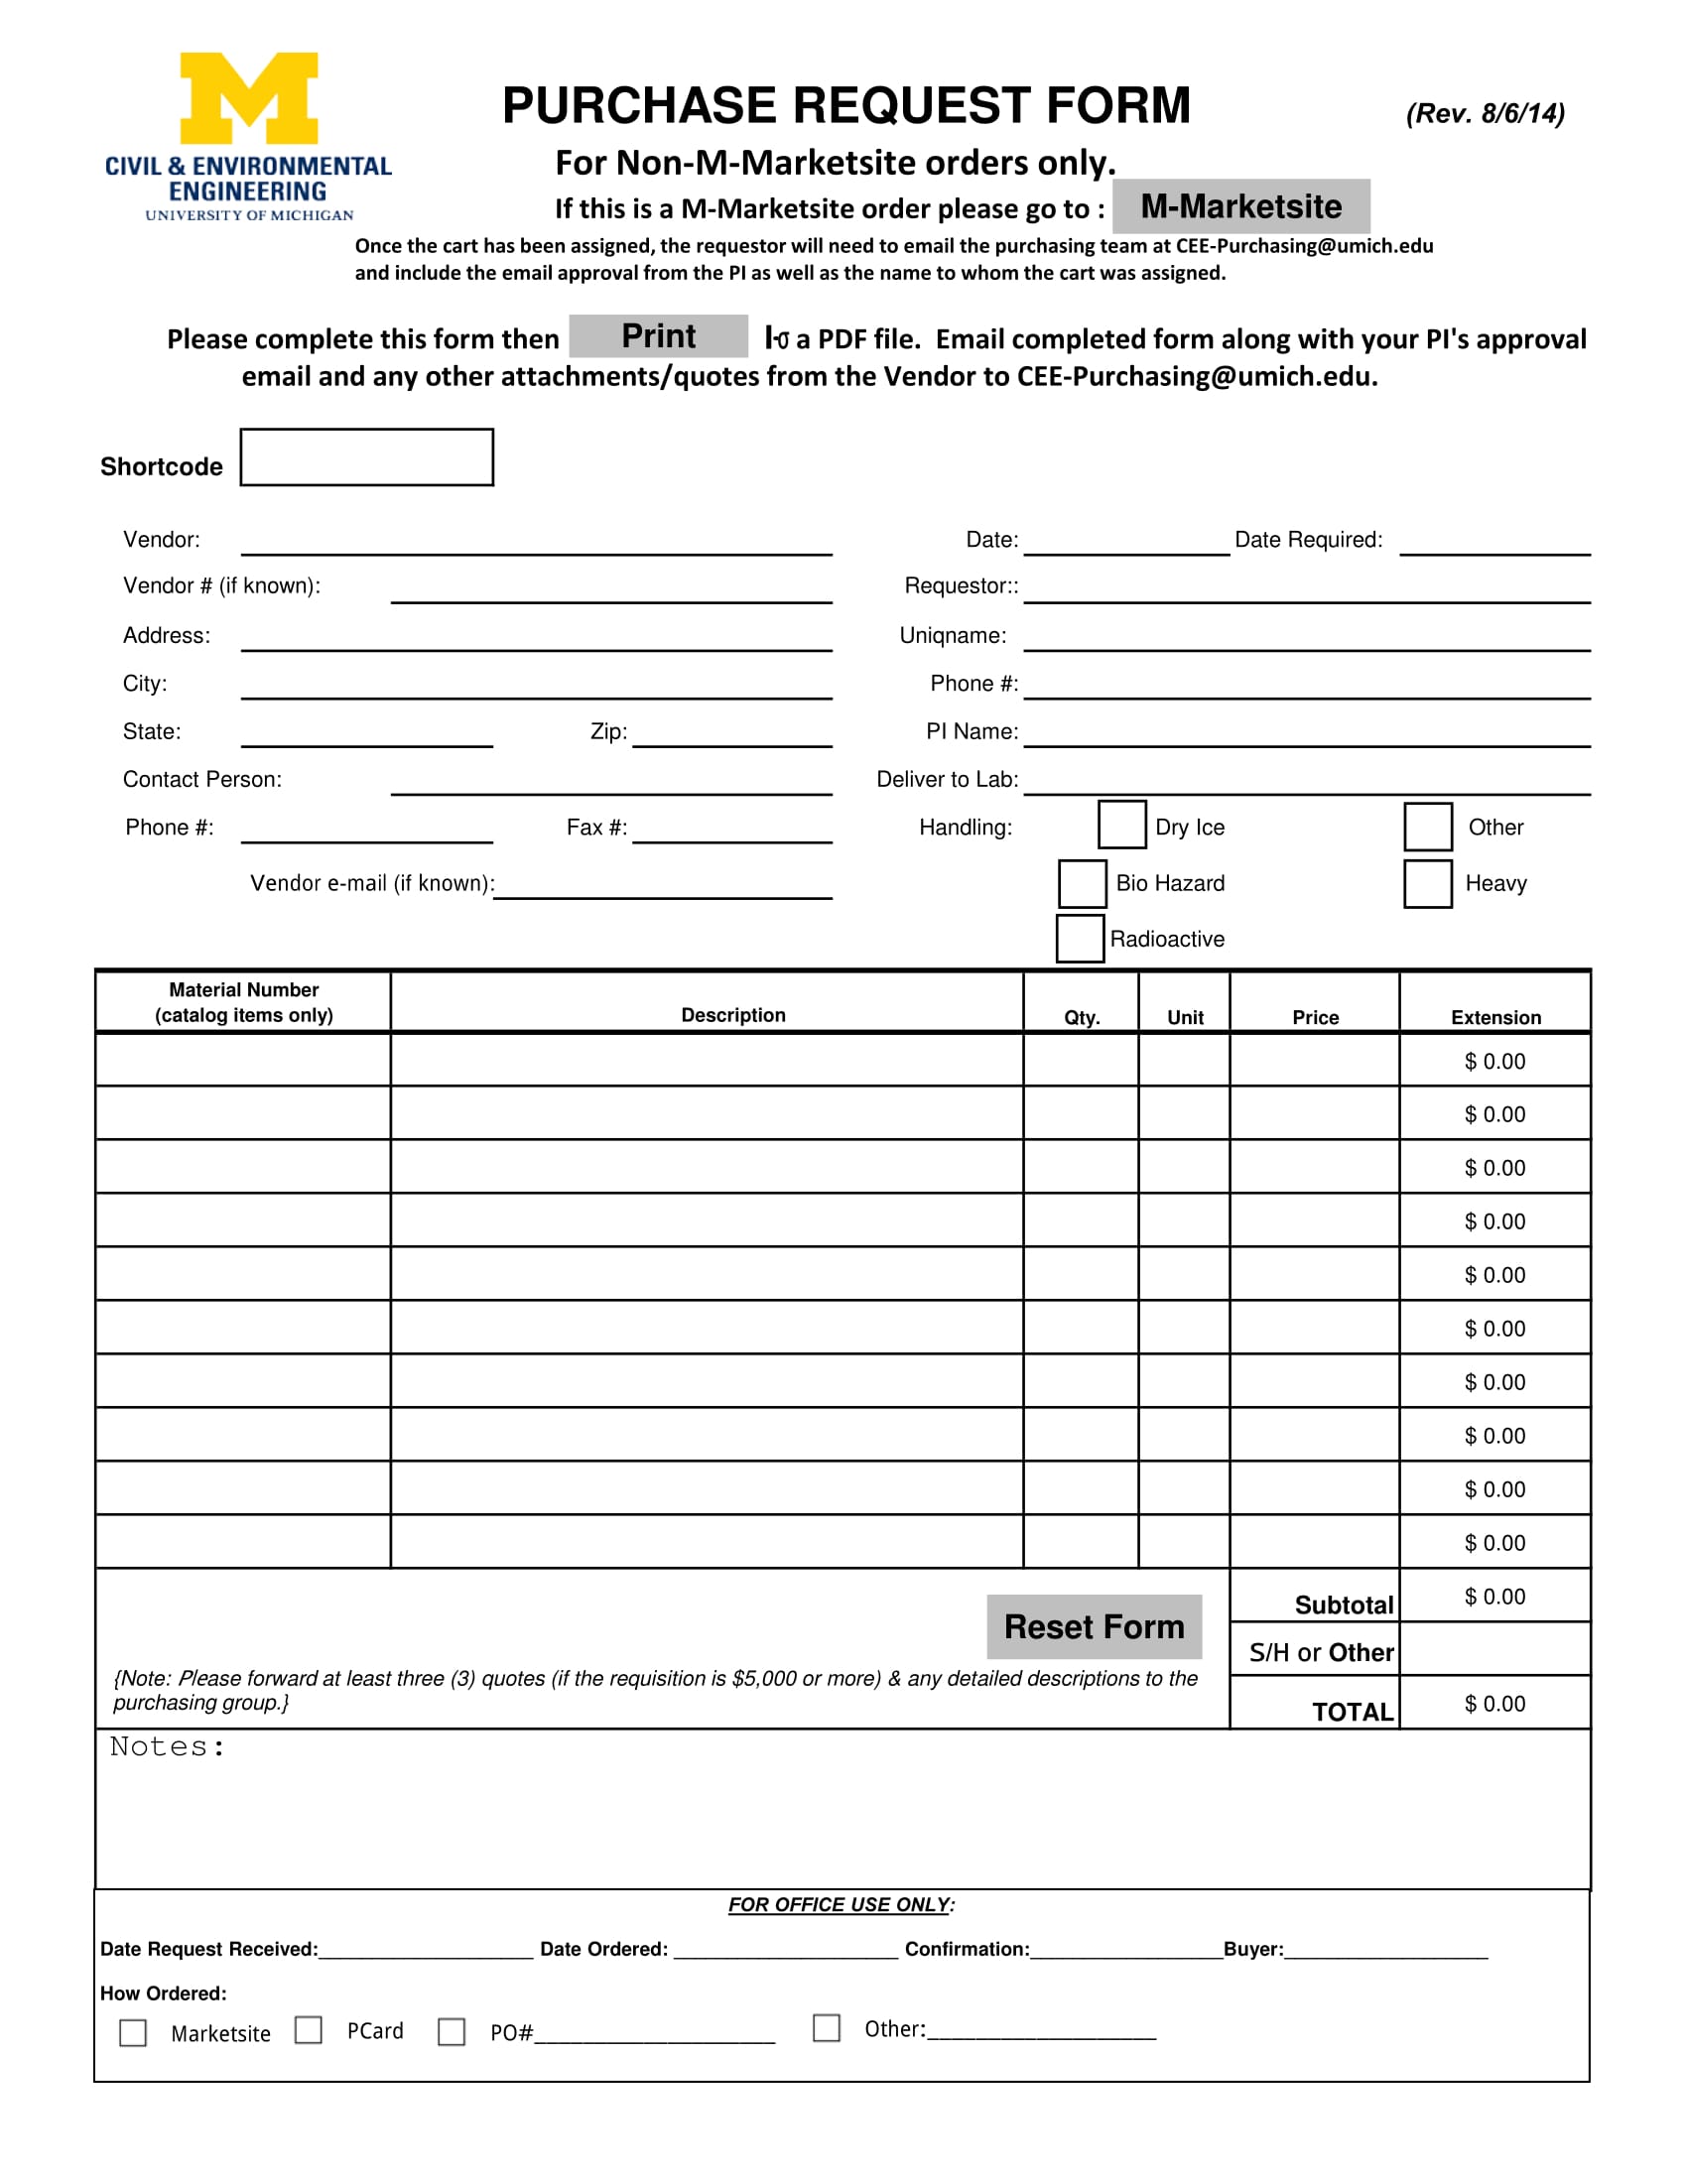 fillable purchase request form in pdf 1